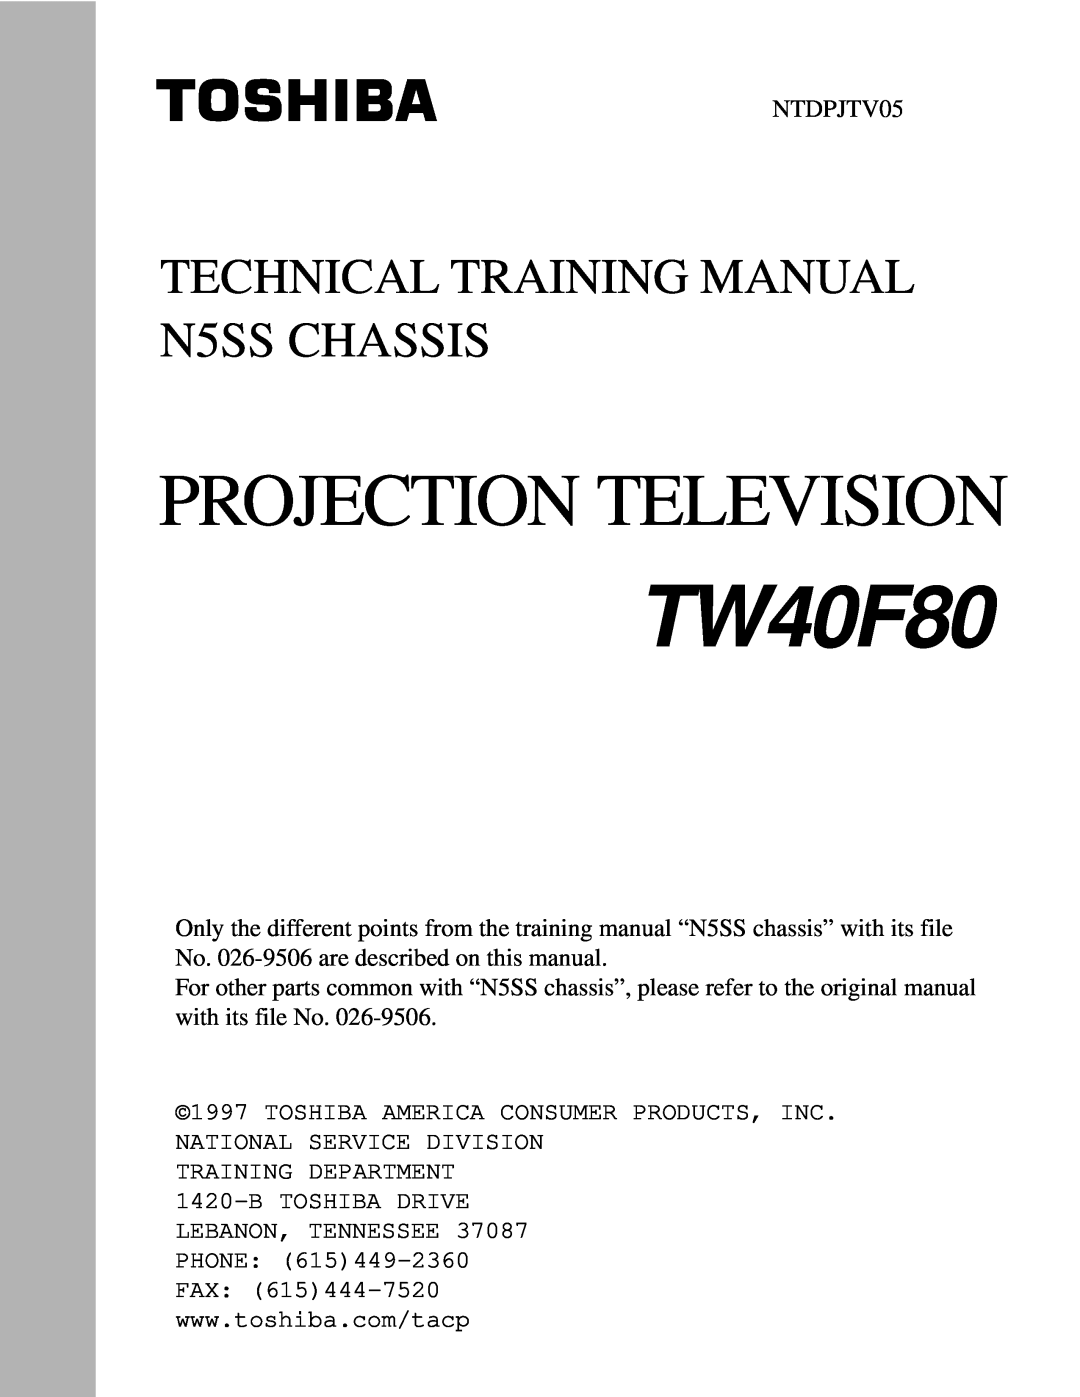 Toshiba TW40F80 manual Projection Television, TECHNICAL TRAINING MANUAL N5SS CHASSIS 